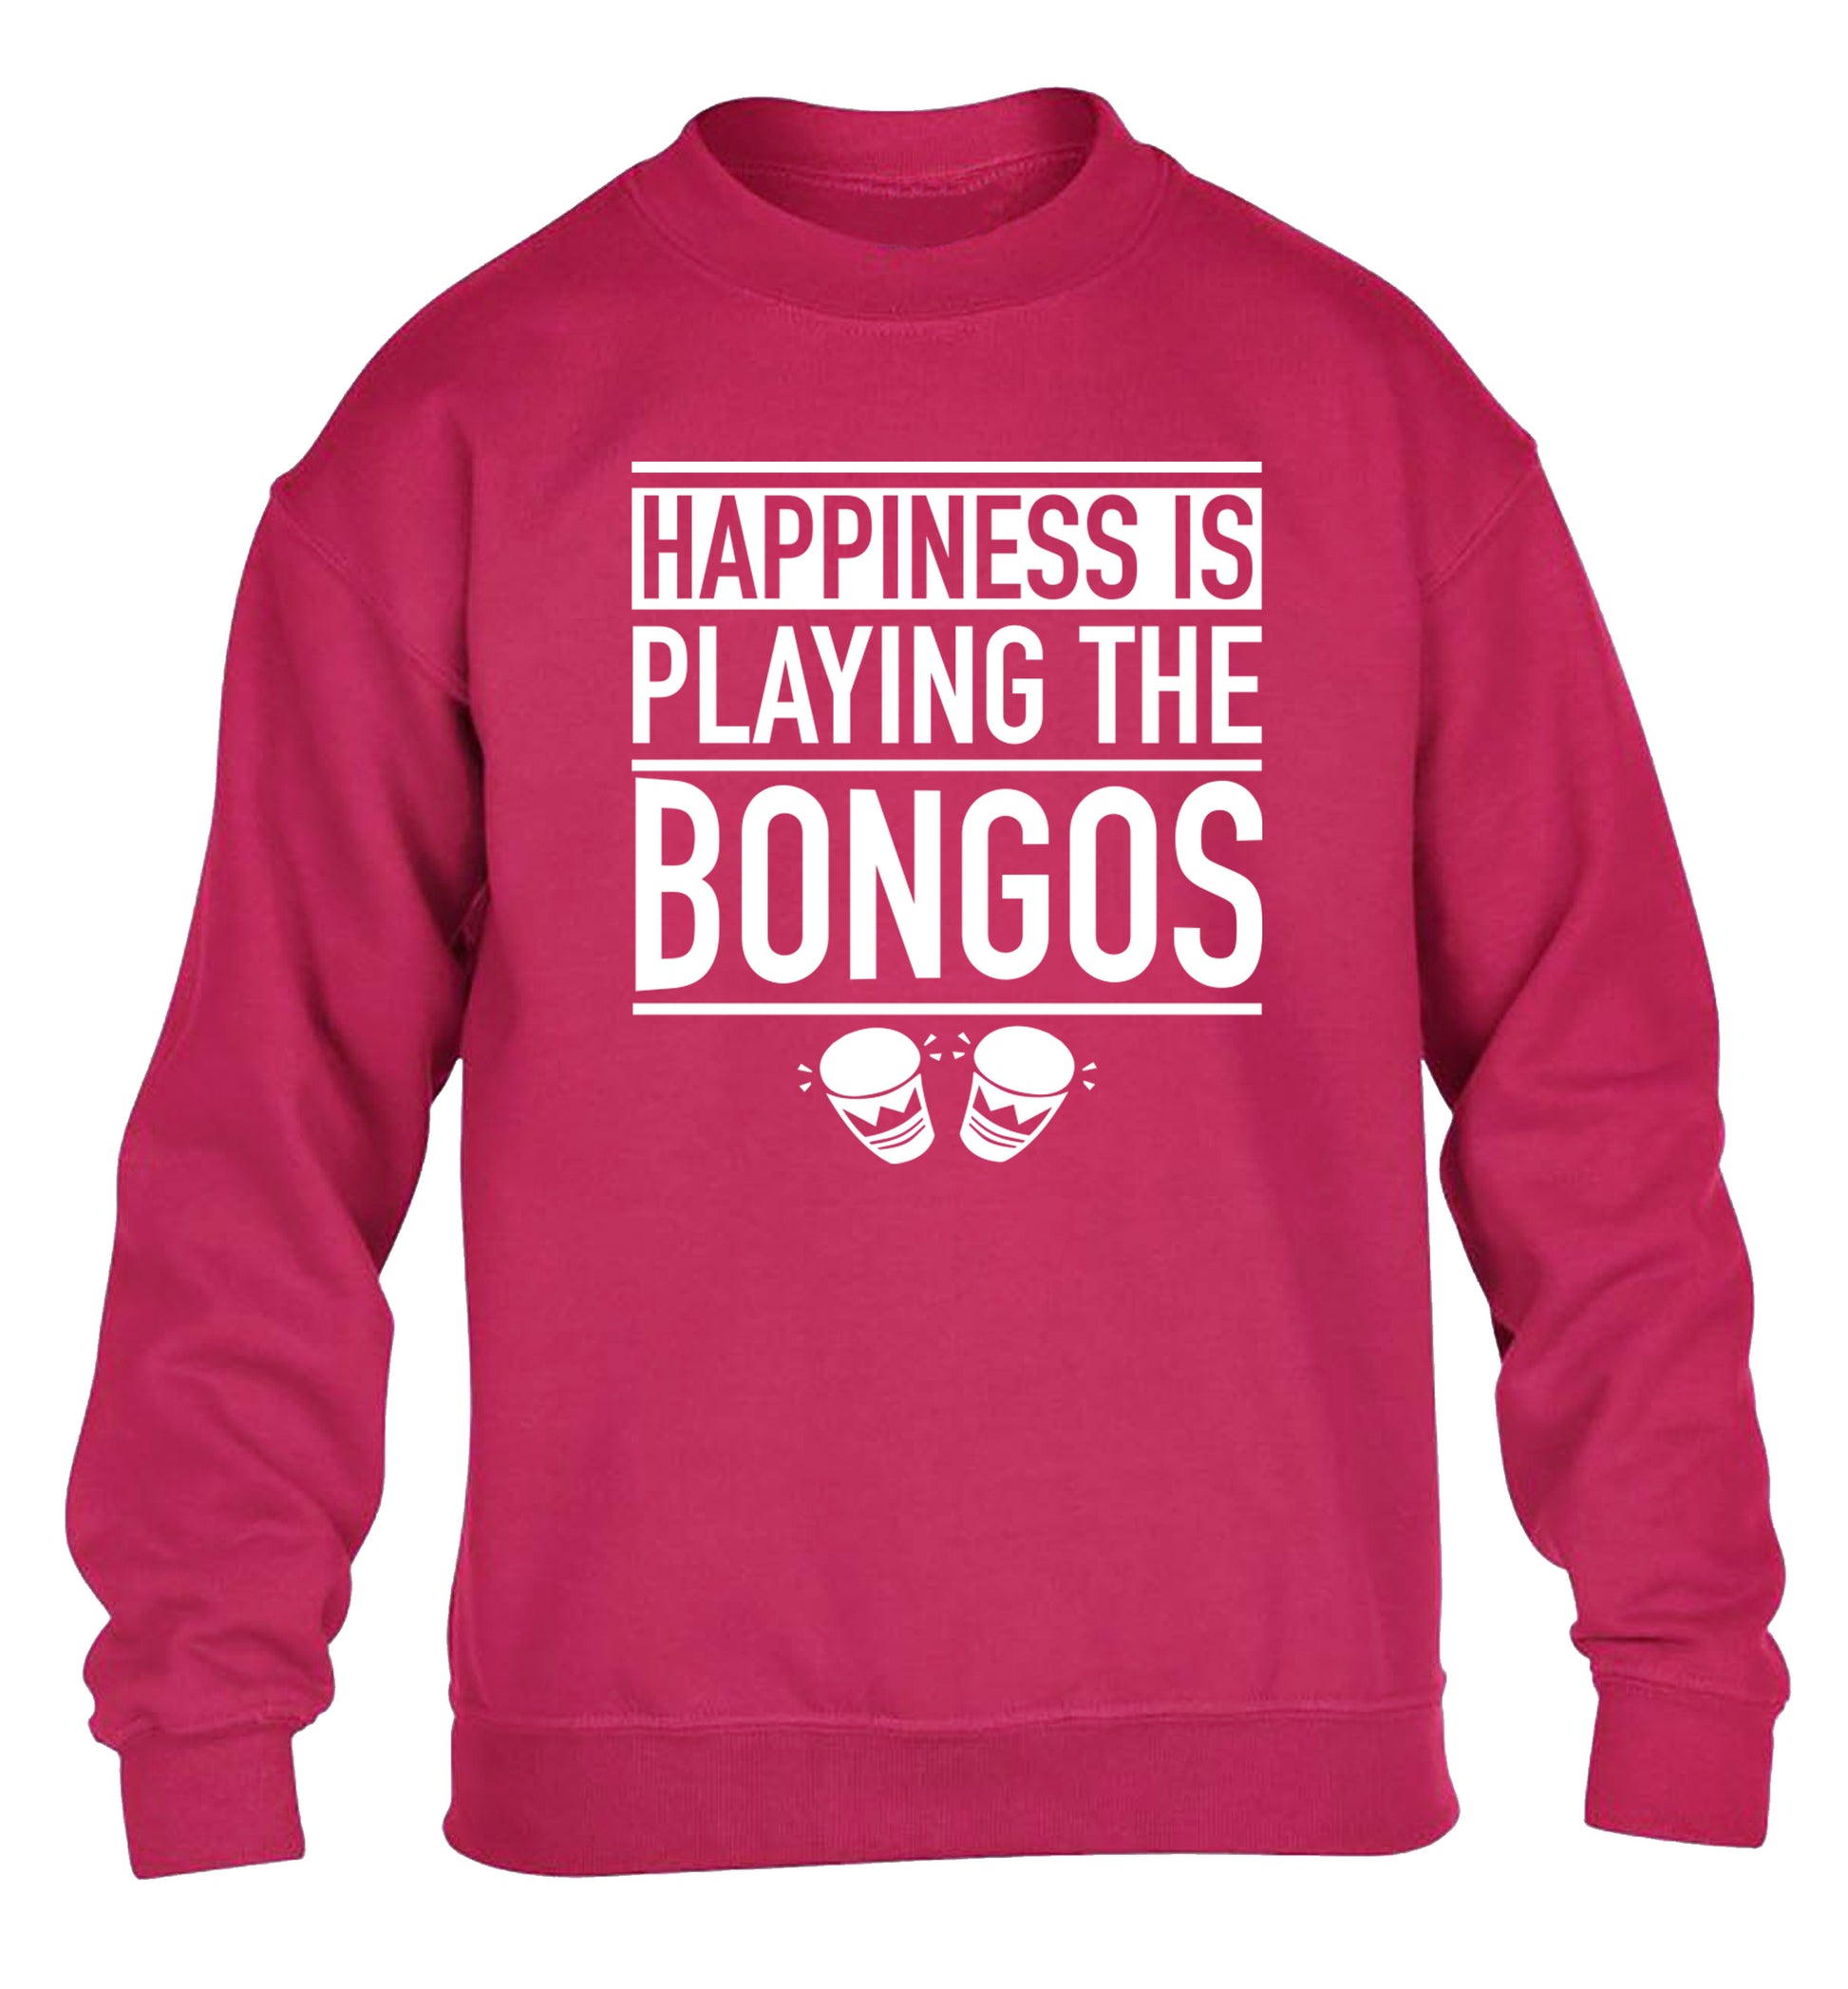 Happiness is playing the bongos children's pink sweater 12-14 Years